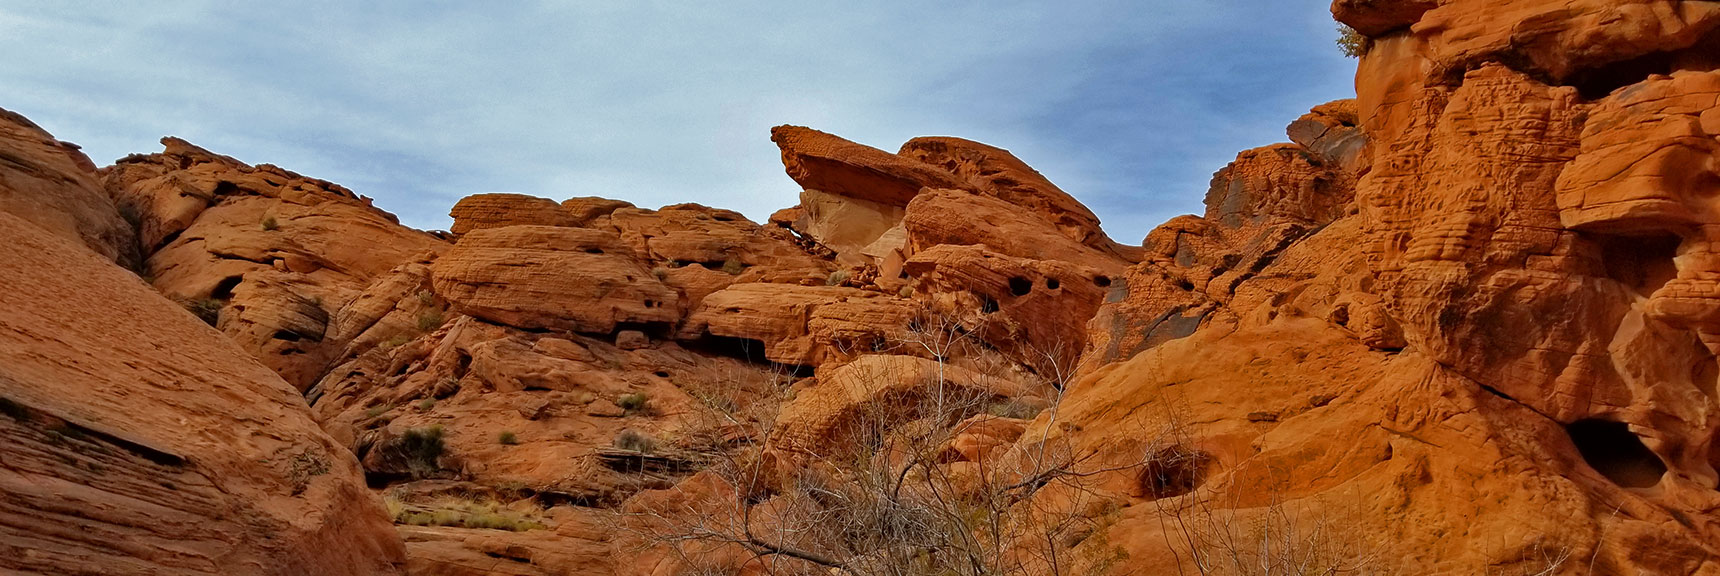 More Fascinating Rock Formations in Fire Canyon in Valley of Fire State Park, Nevada